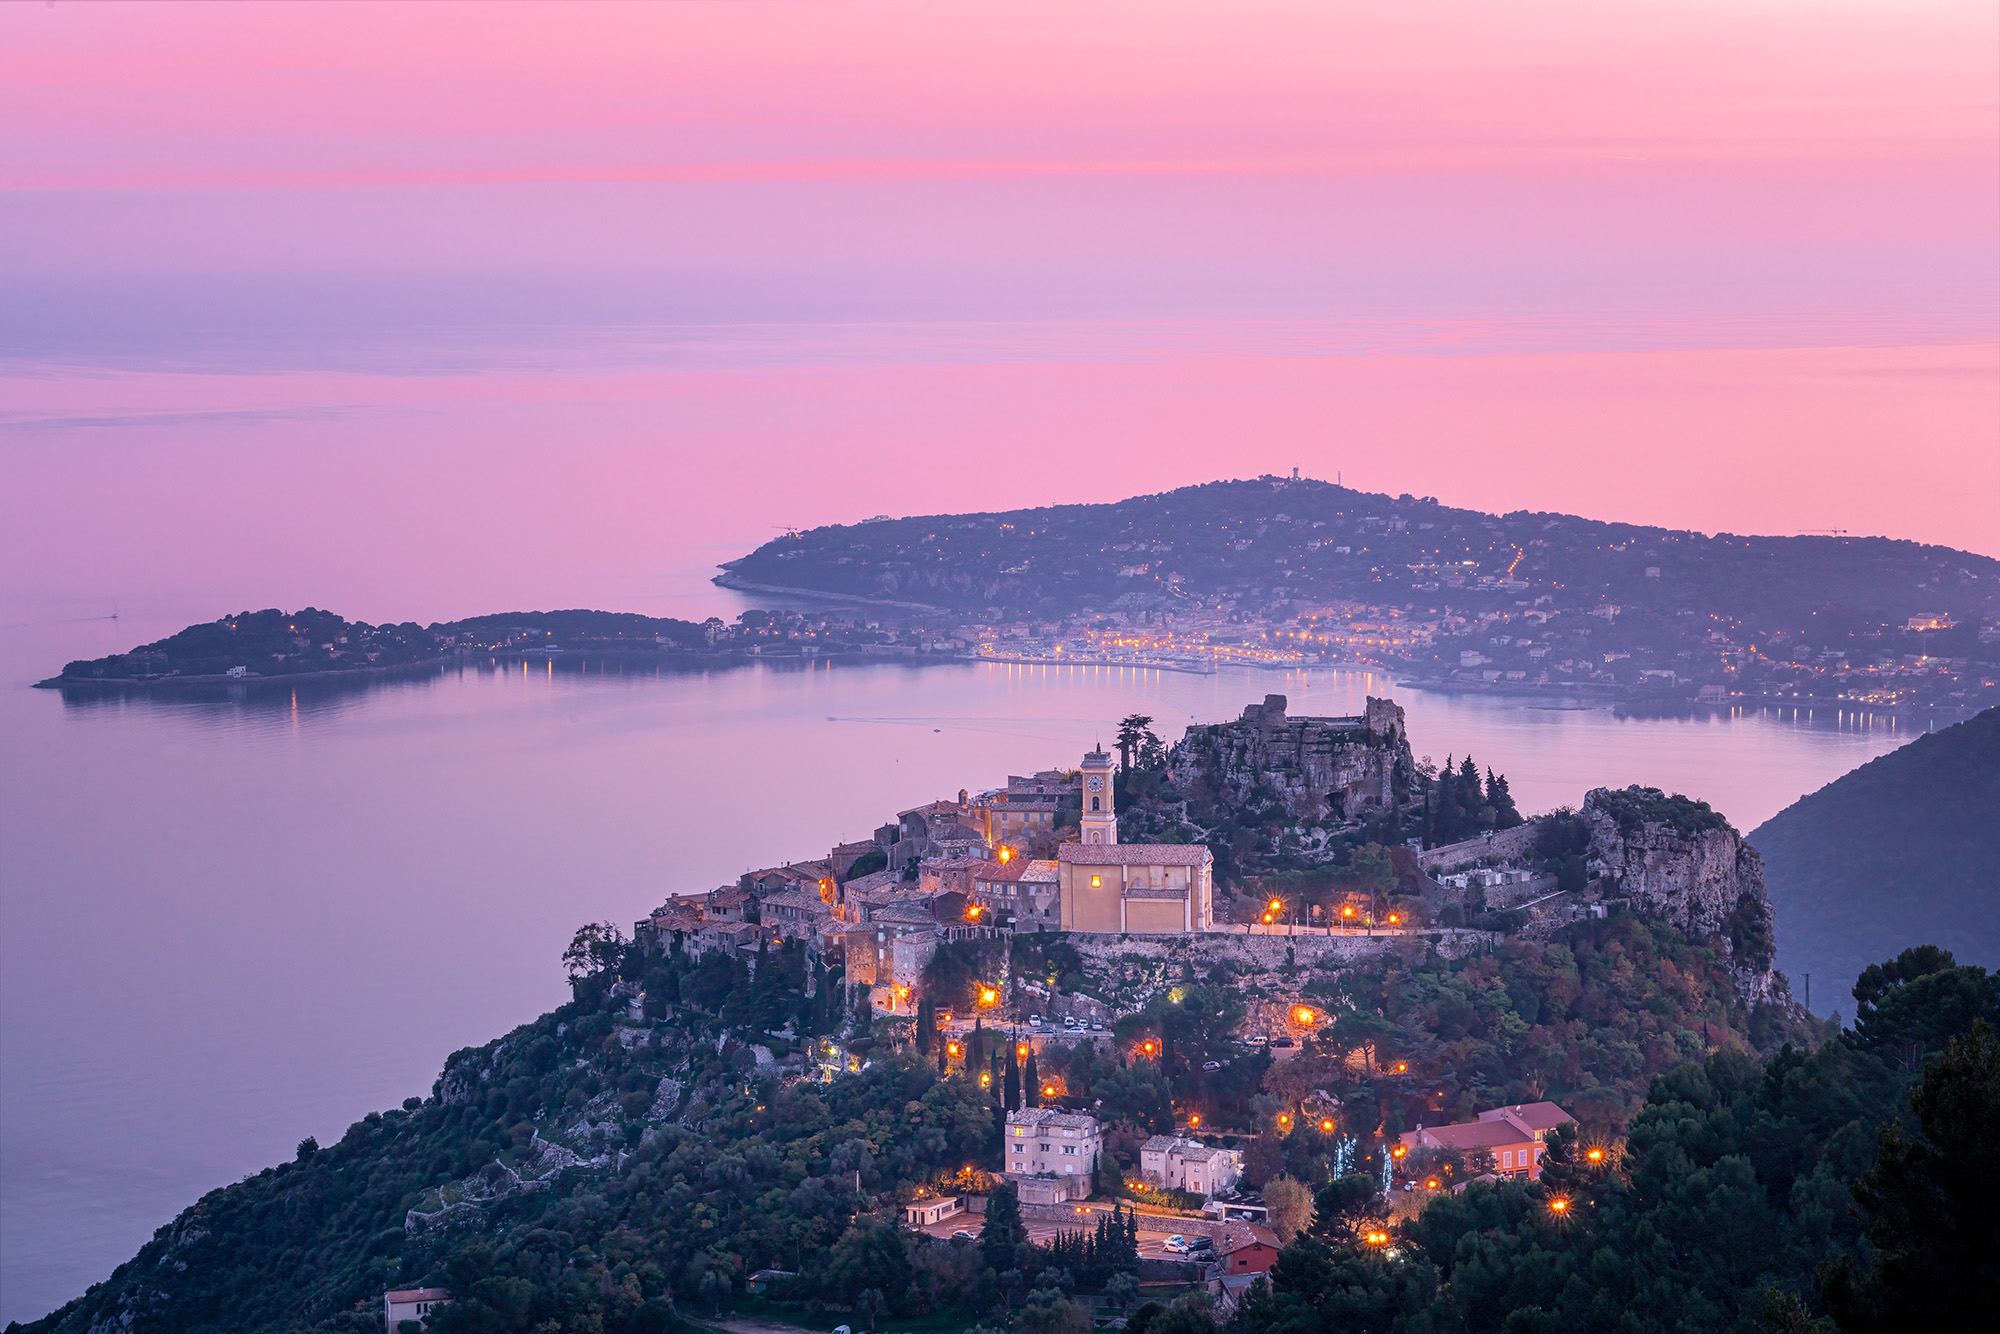 In Eze, France, Veronica and I embarked on an early scouting mission, searching for a high vantage point above the Eze center...